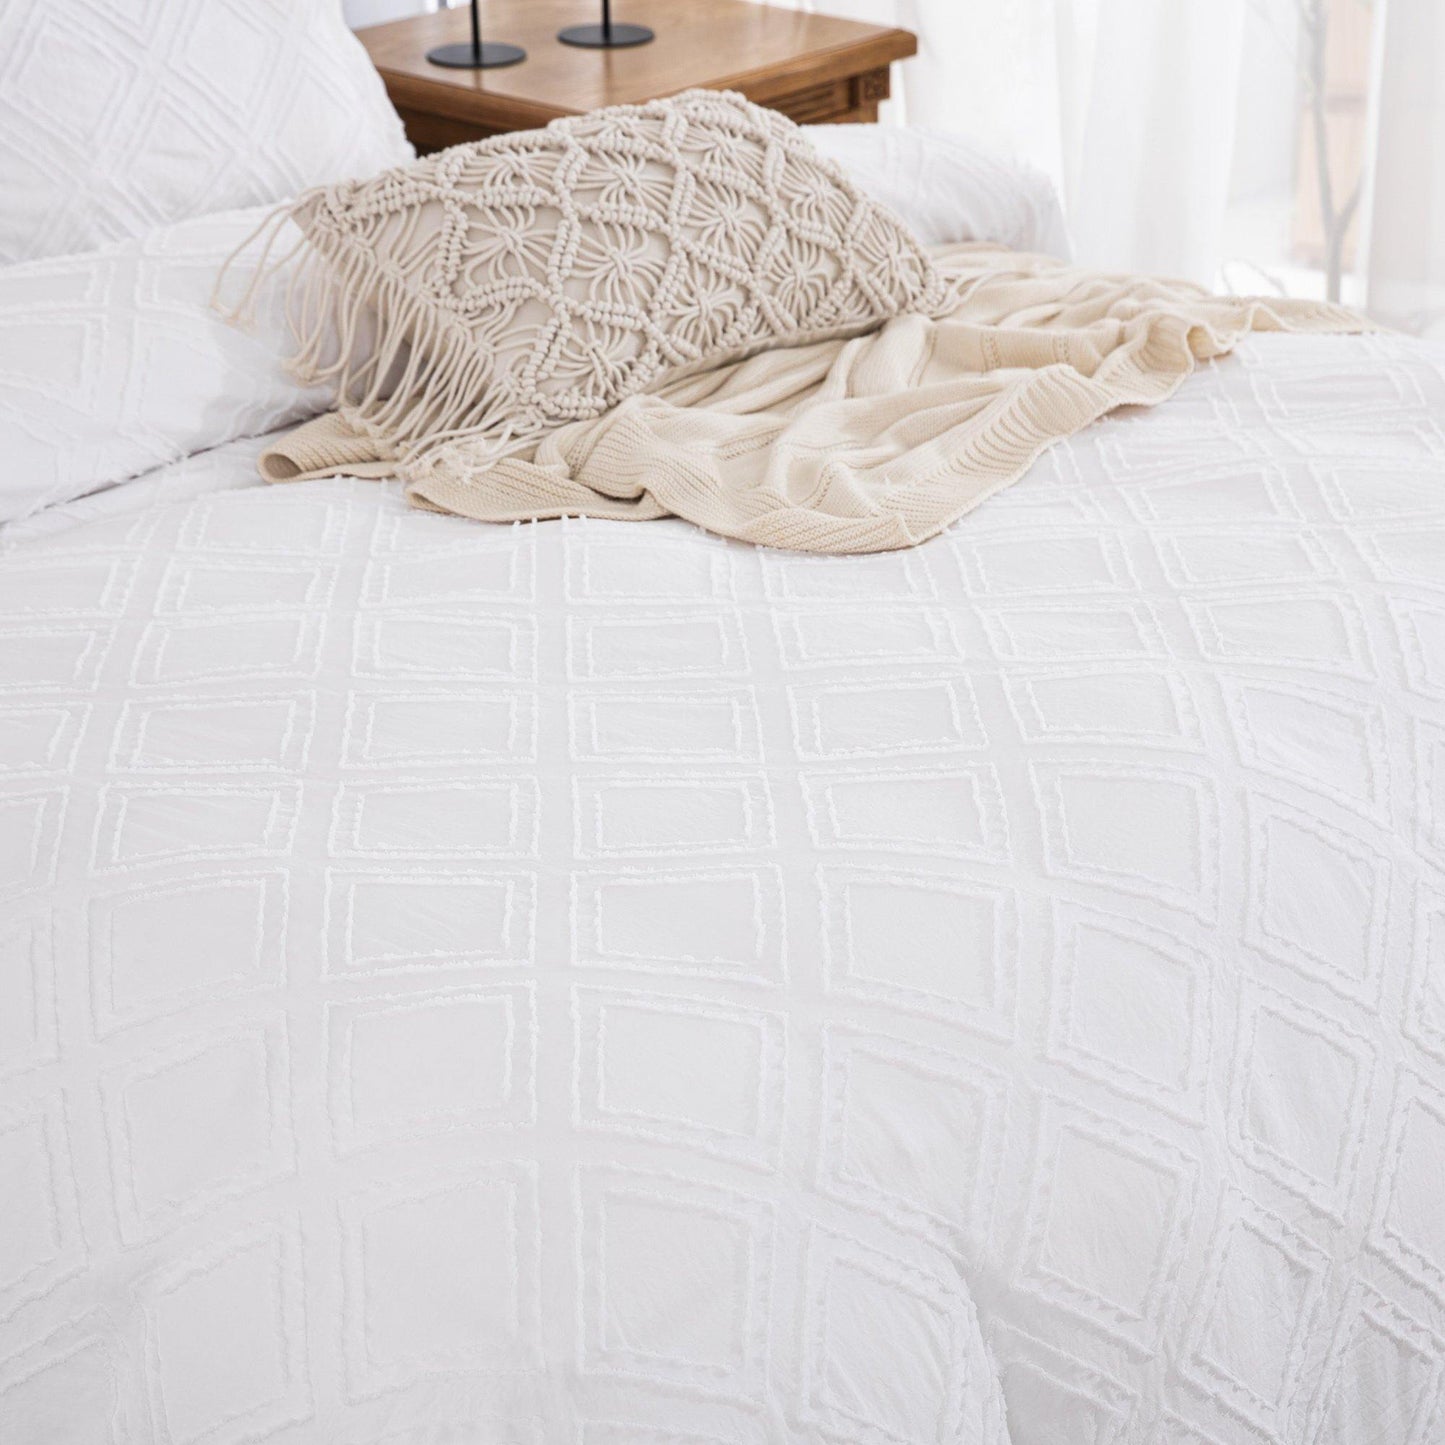 WONGS BEDDING Pure White Polygon Texture Bedding Set Quilt Cover Pillowcase - Wongs bedding